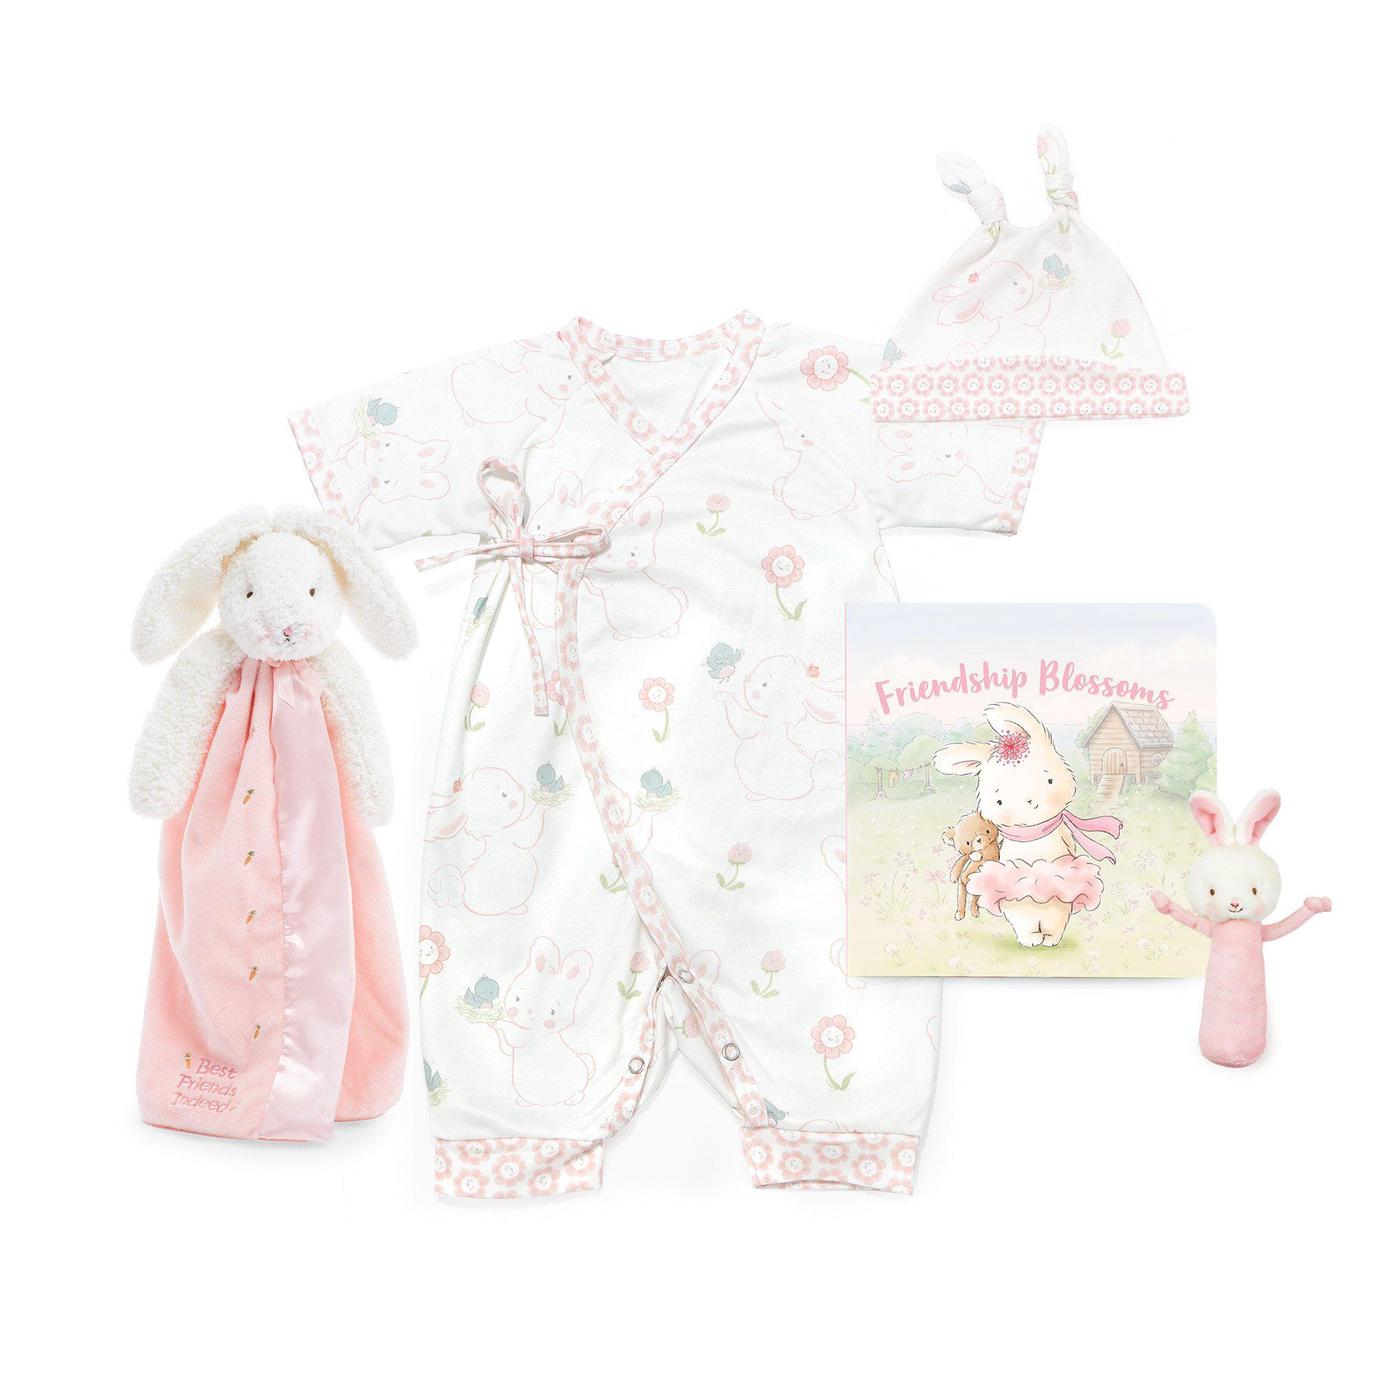 Welcome Baby Girl - Layette Gift Set (0-3 and 3-6 months)